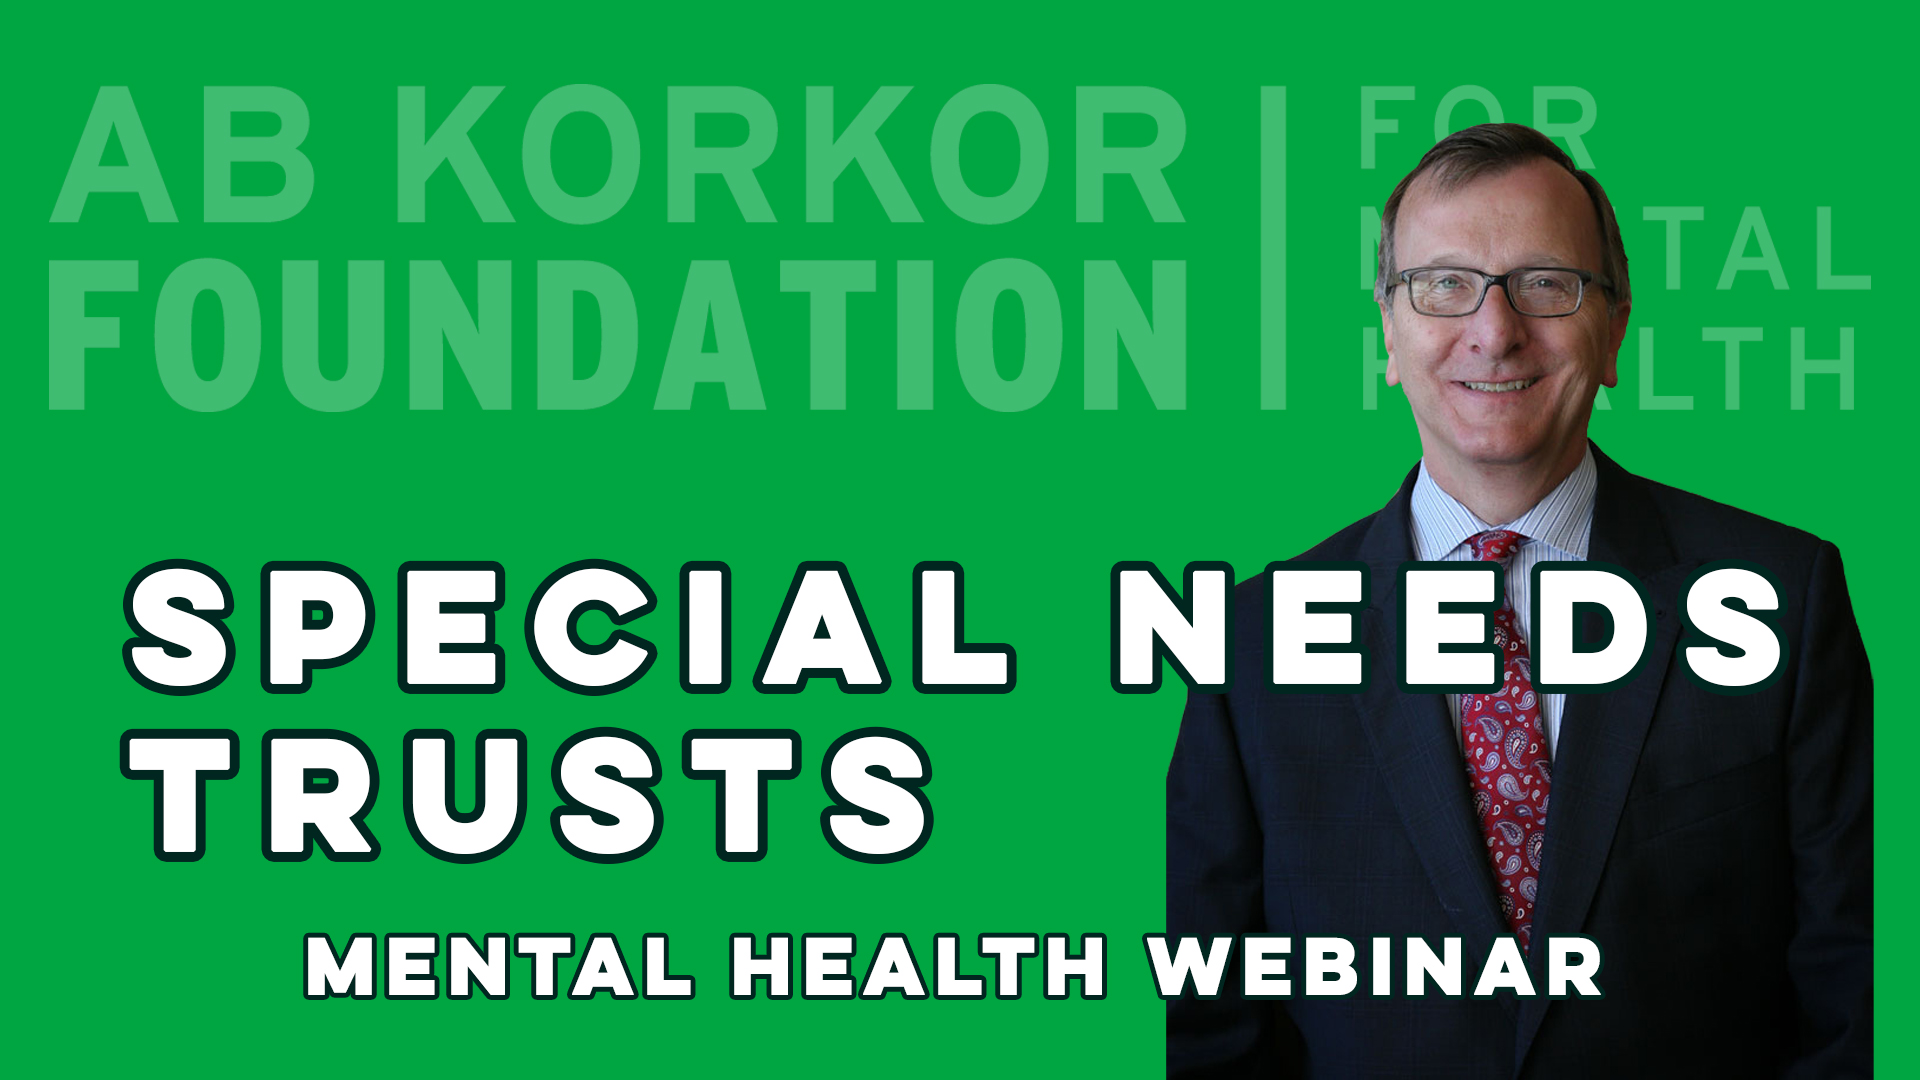 Special Needs Trusts - Terry Campbell - Mental Health Webinar